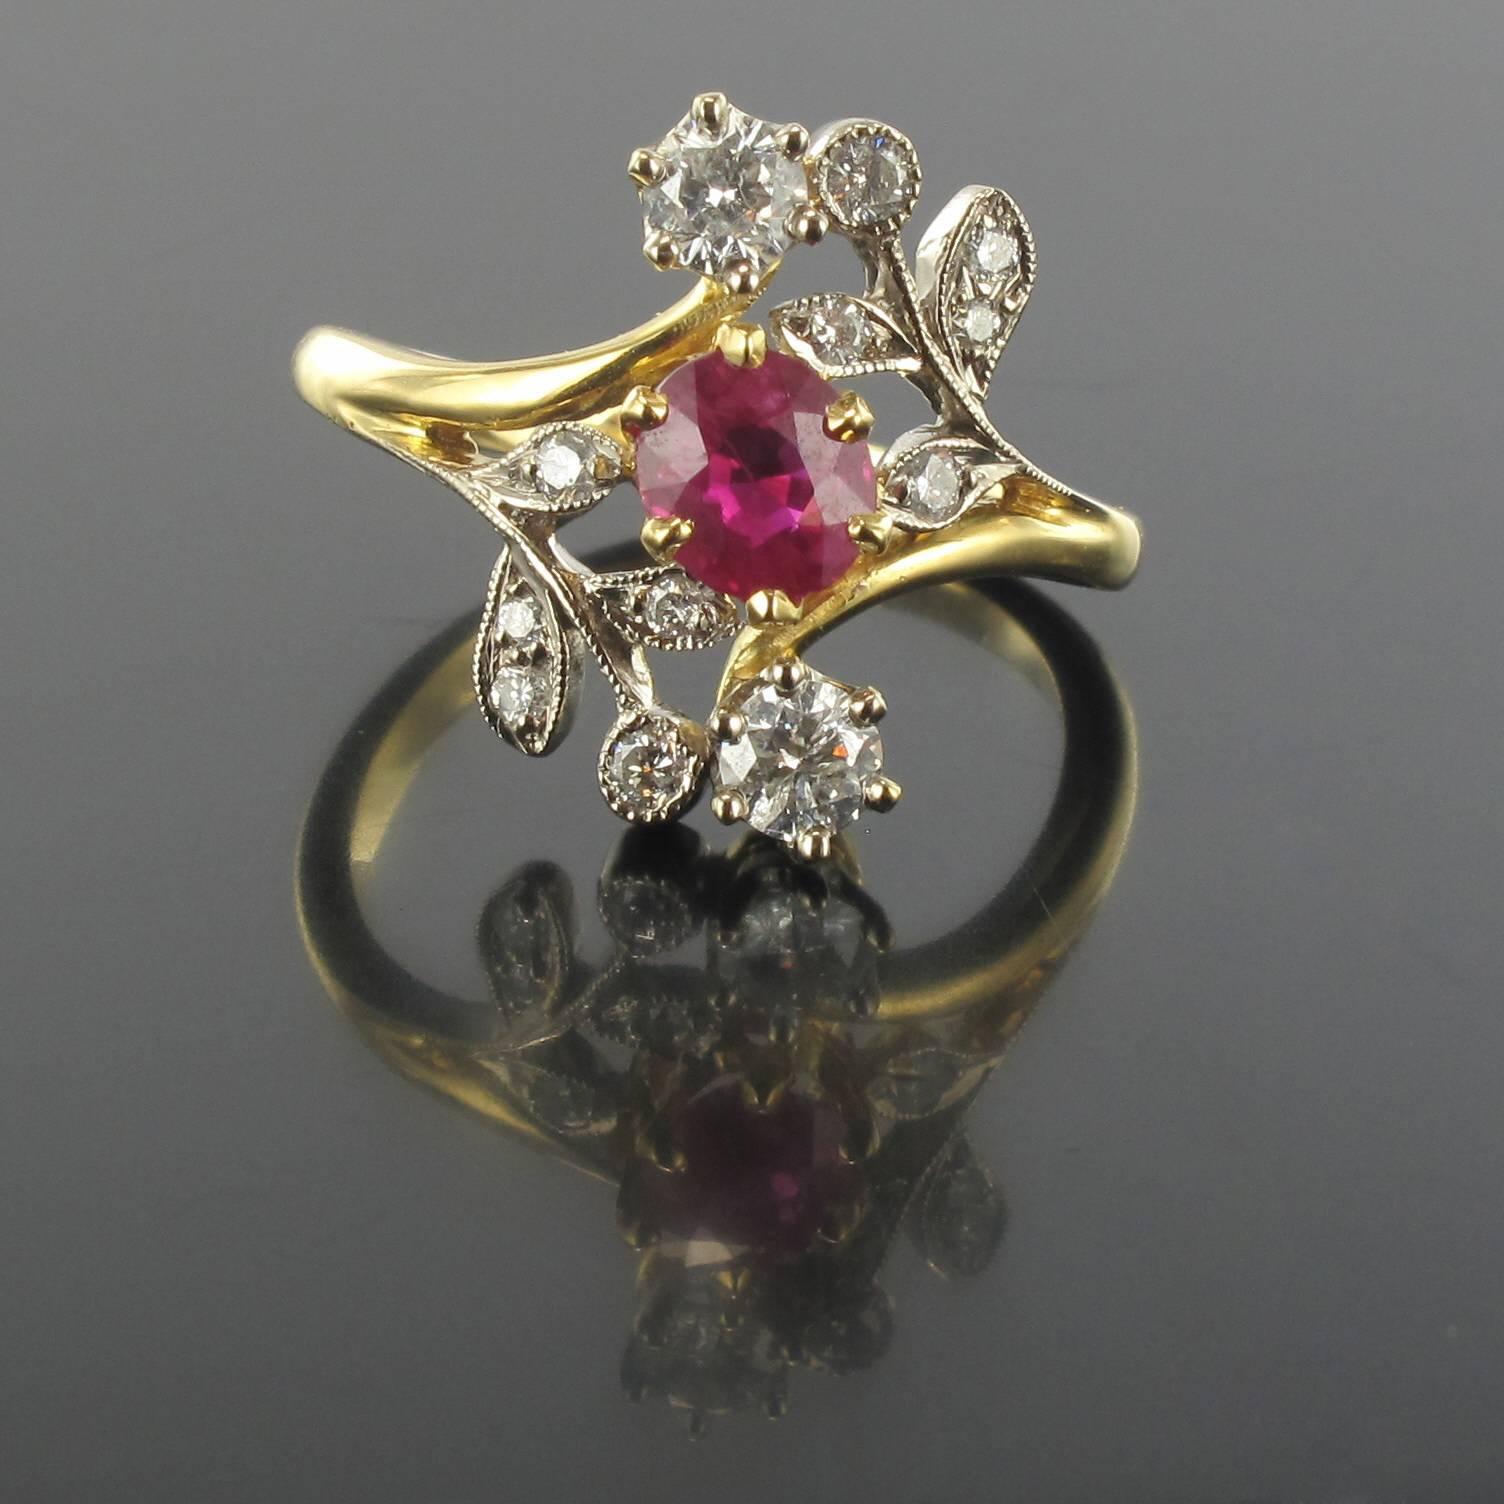 Ring in 18 carat yellow gold, eagle head hallmark. 

This ring features a claw set oval red ruby surrounded by a floral design with a diamond pave. 

Ruby Weight: 0.72 carat approximately
Total diamond weight: 0.46 carat approximately
Total